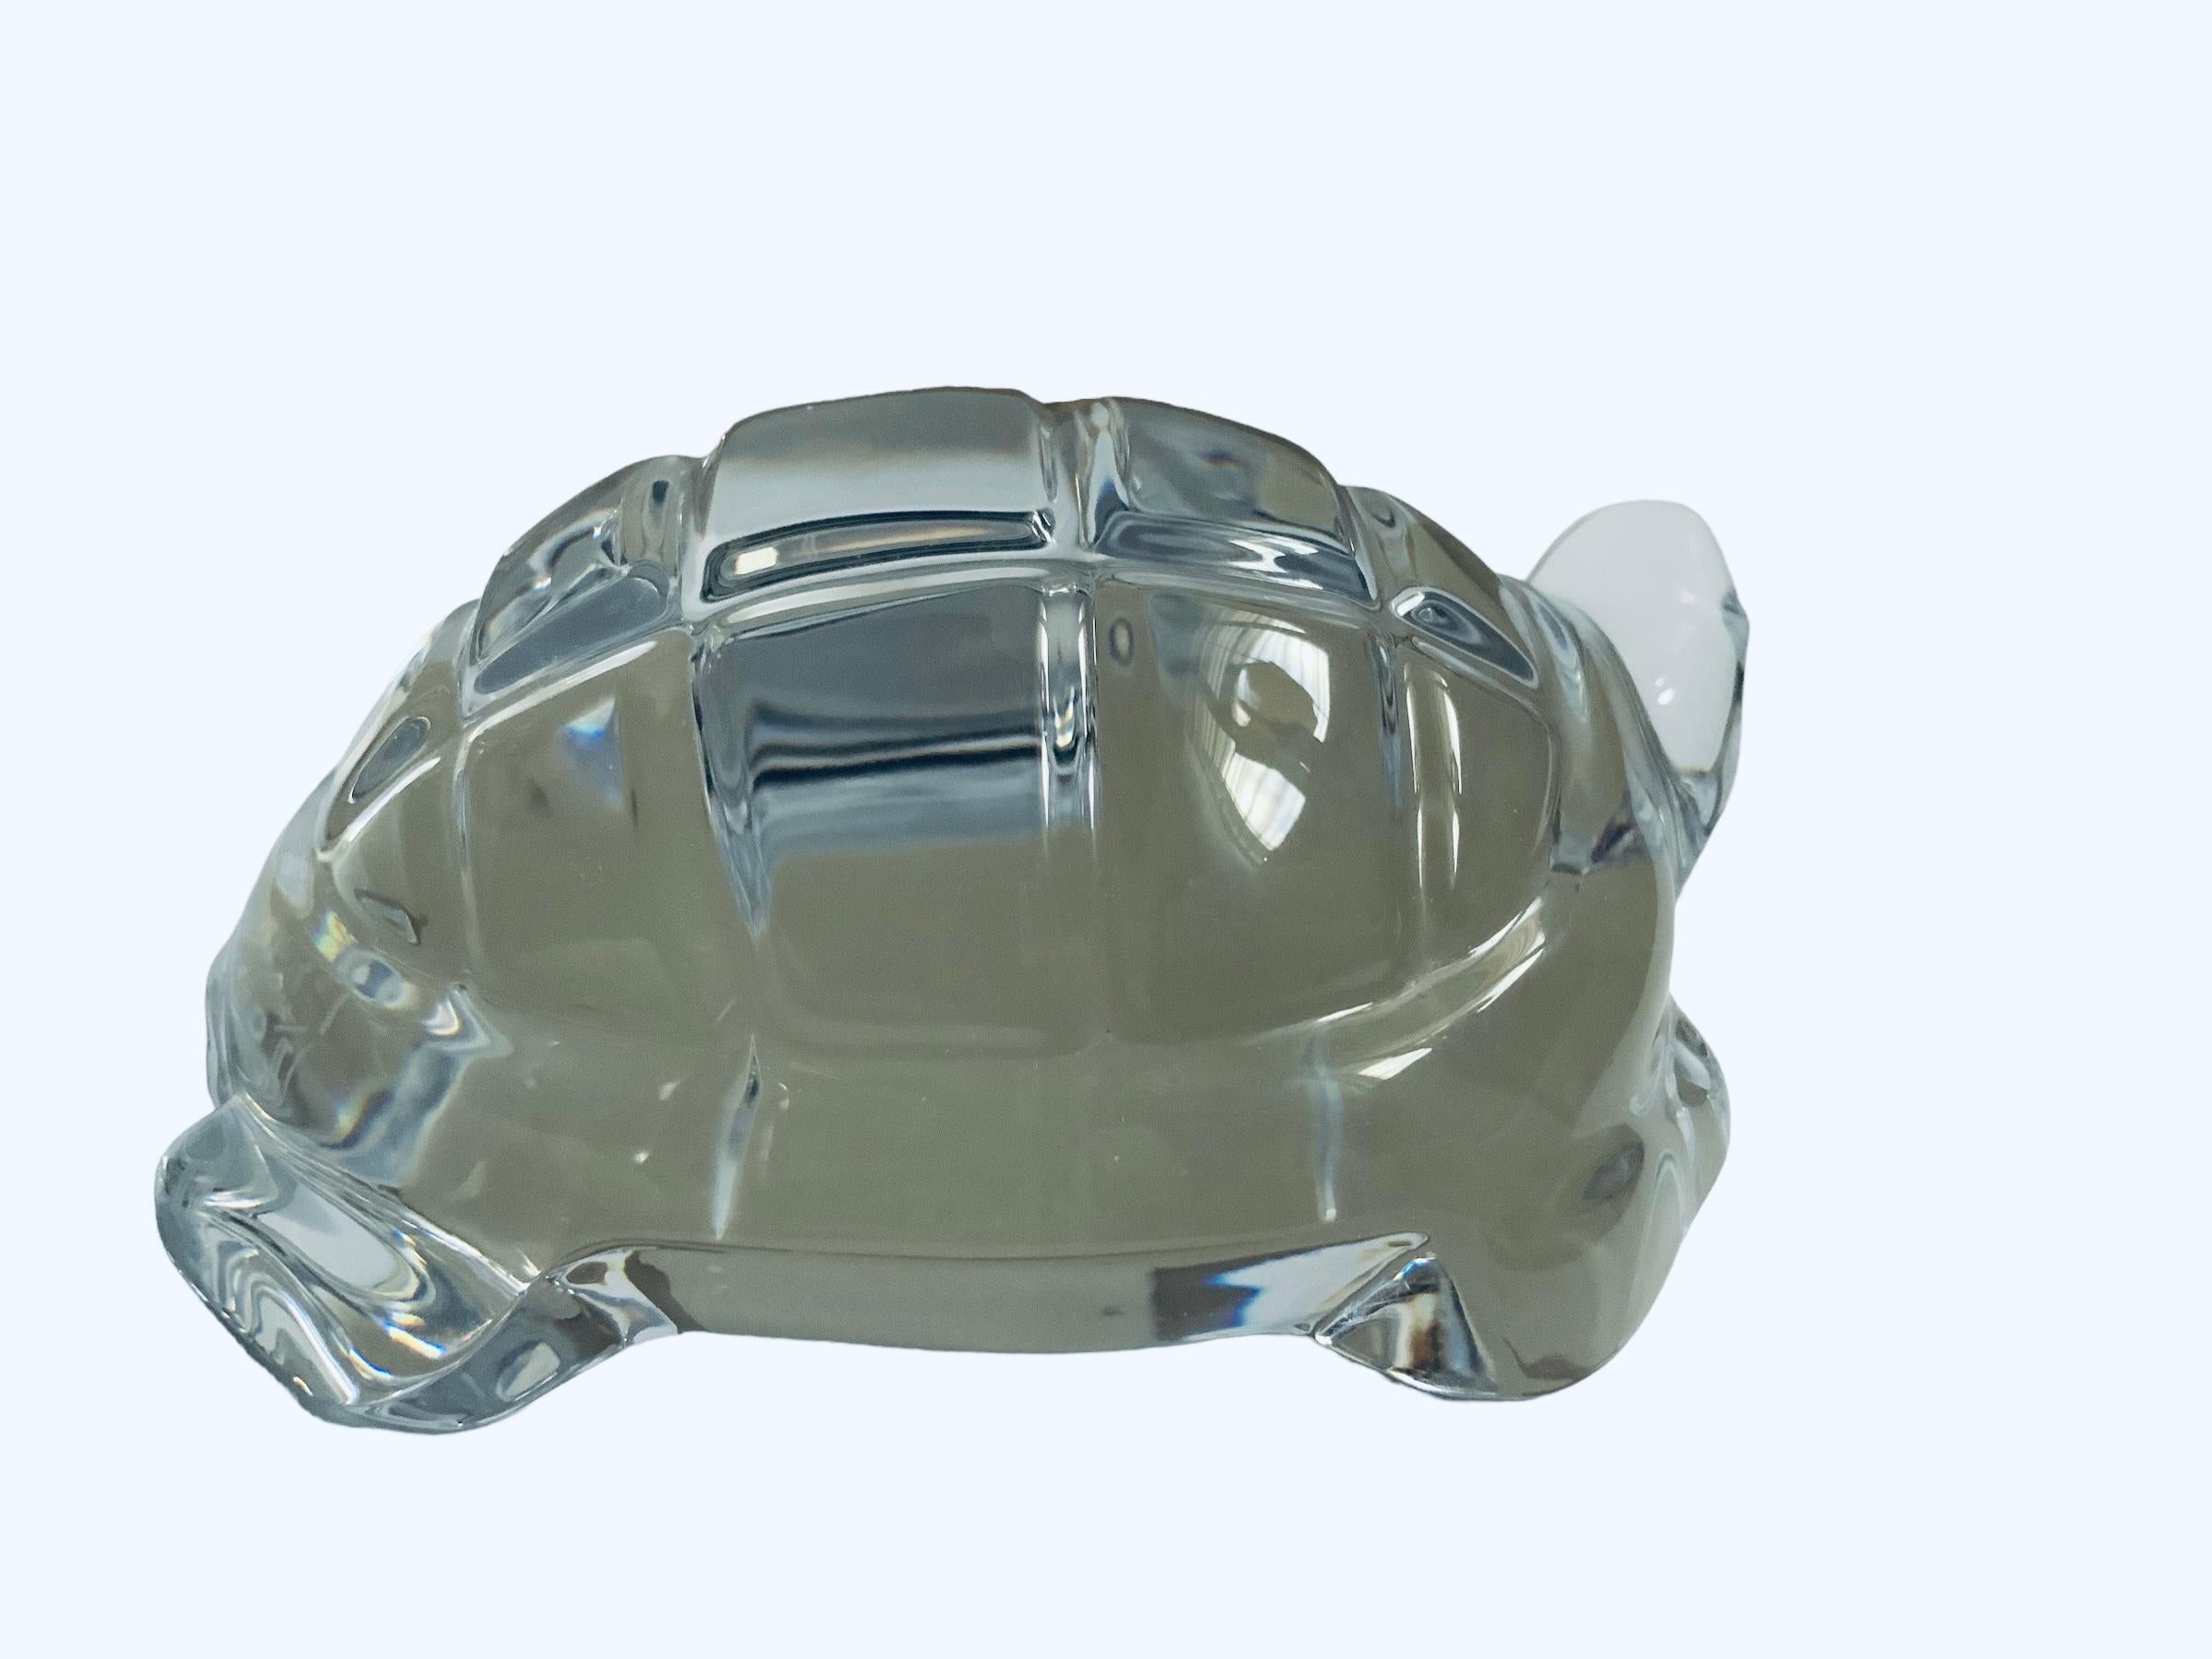 This is a Baccarat Crystal Turtle sculpture/paperweight. It depicts a turtle with an oval shaped clear crystal carapace, head, legs and neck. It has the acid etched hallmark of Baccarat, France below the base and also in one of the sides.